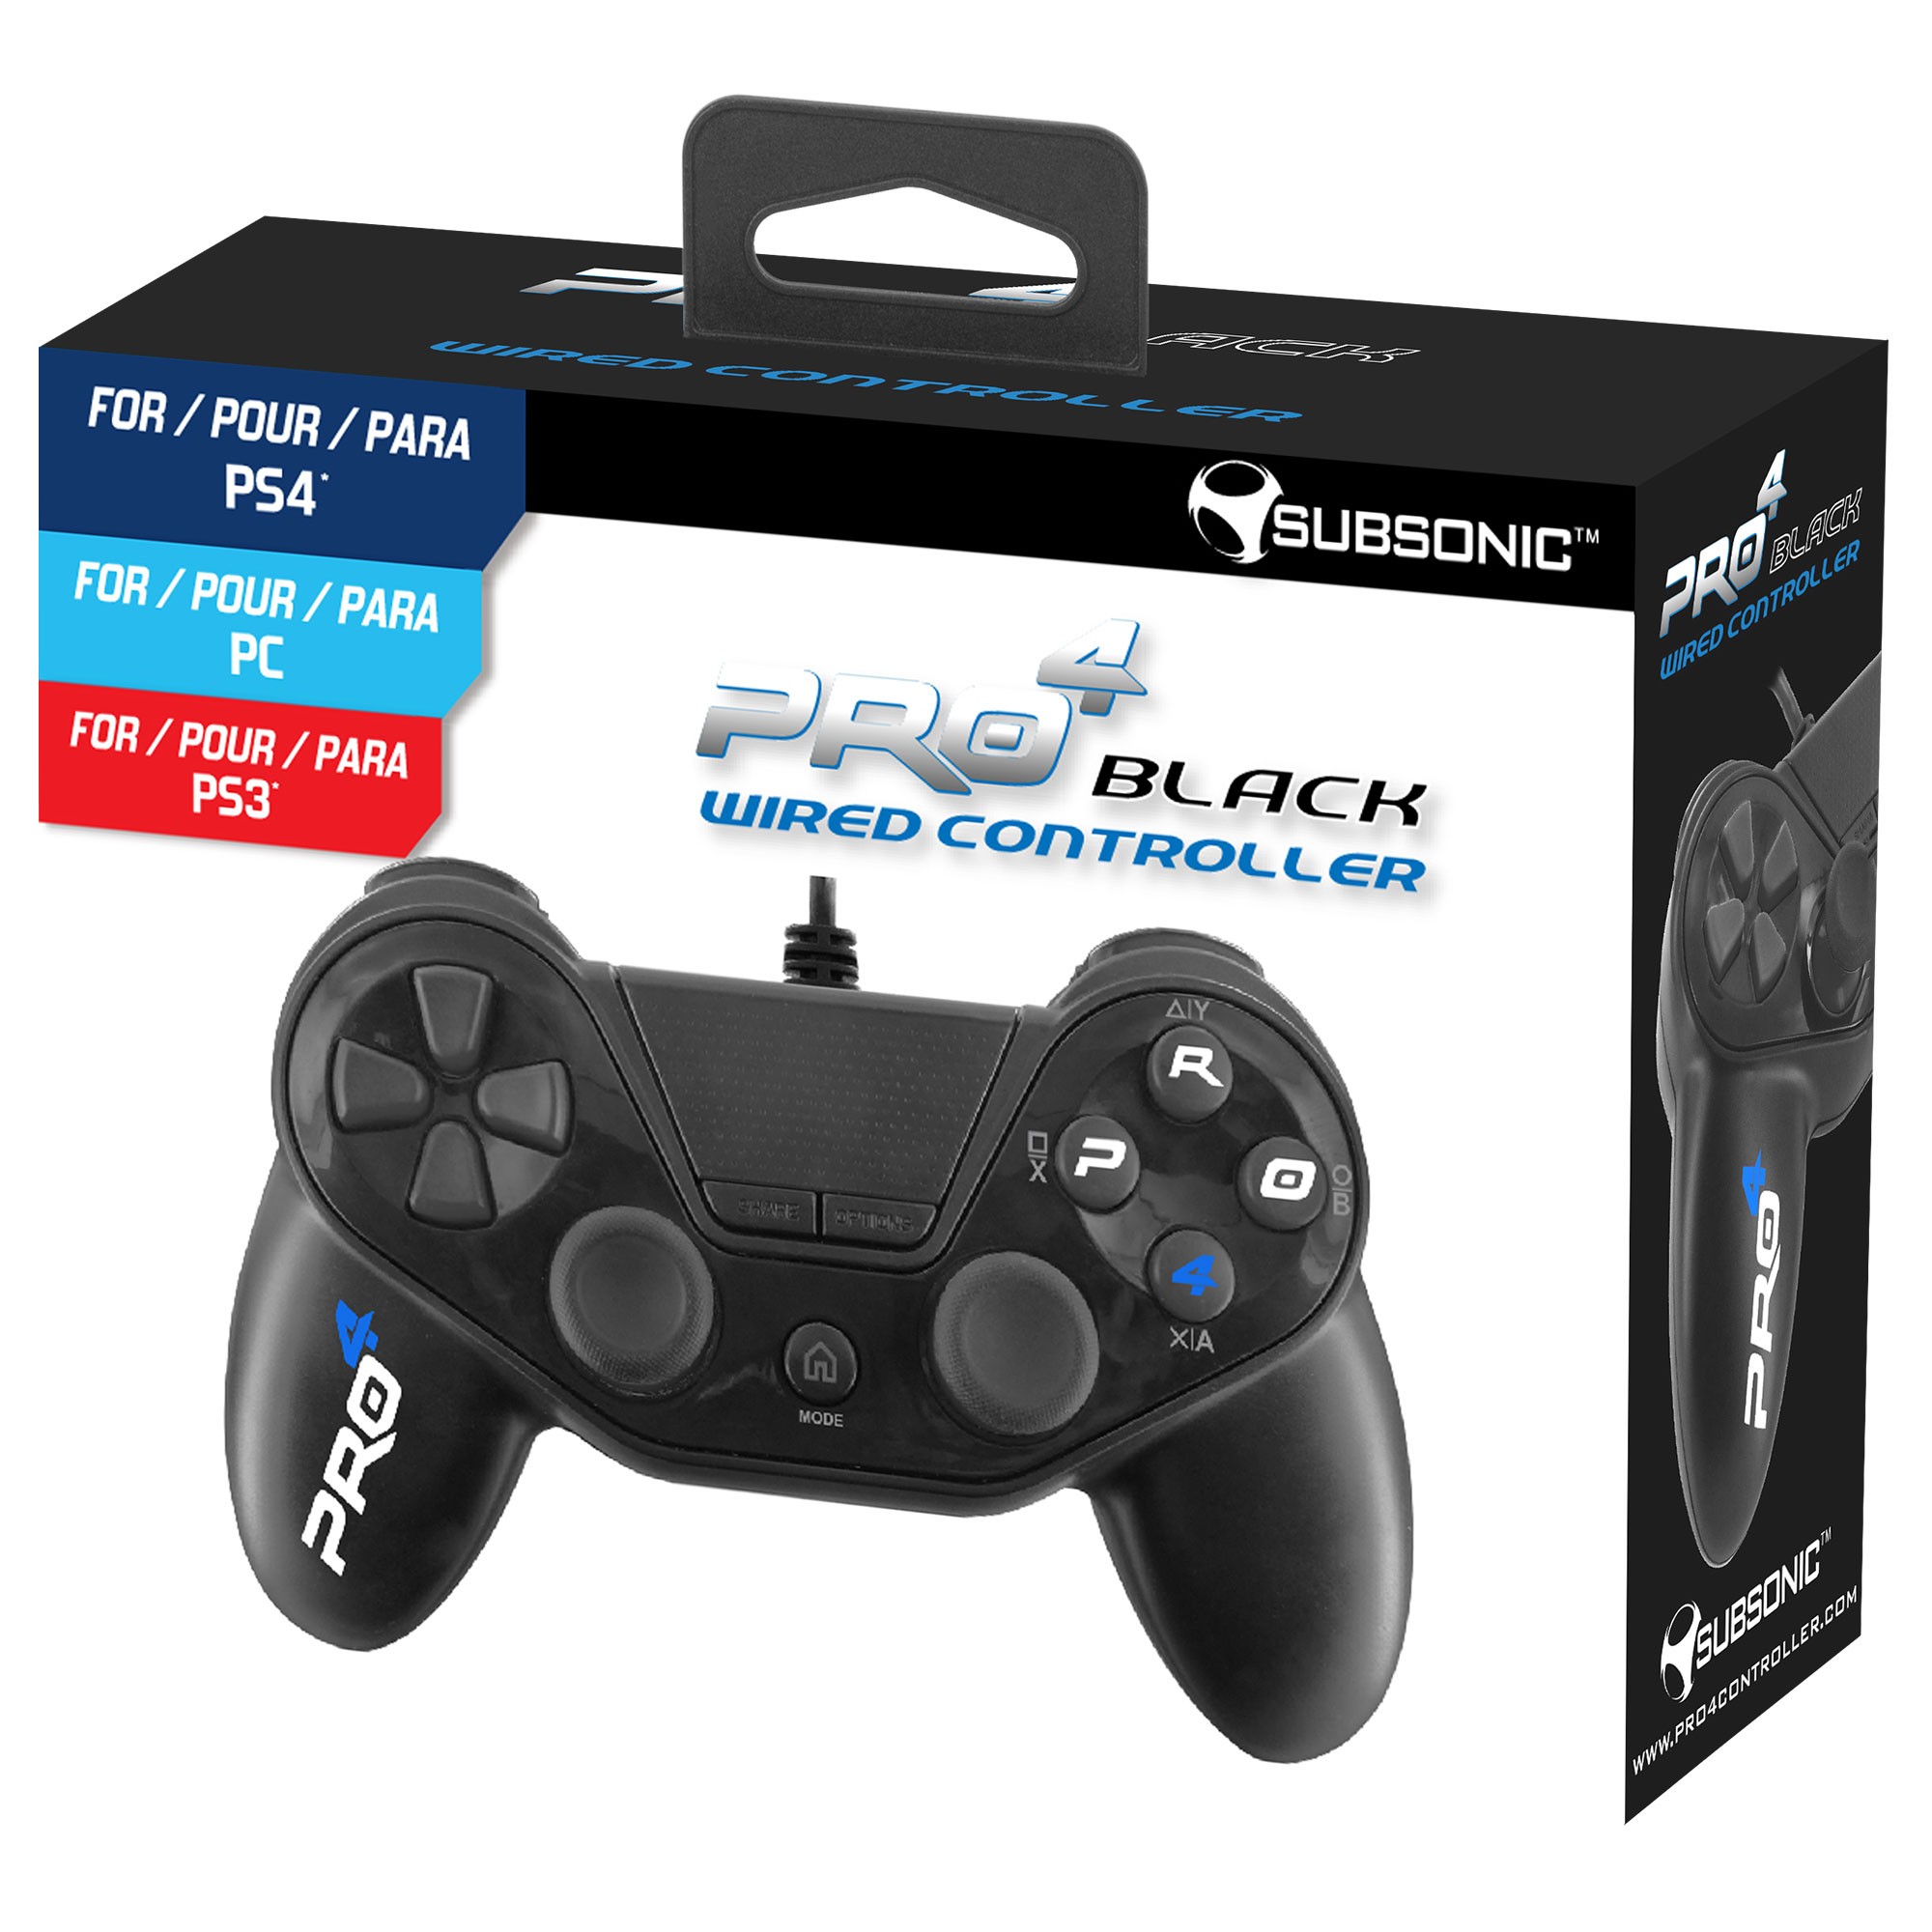 PS3, PS4 and PC compatible controller | Subsonic